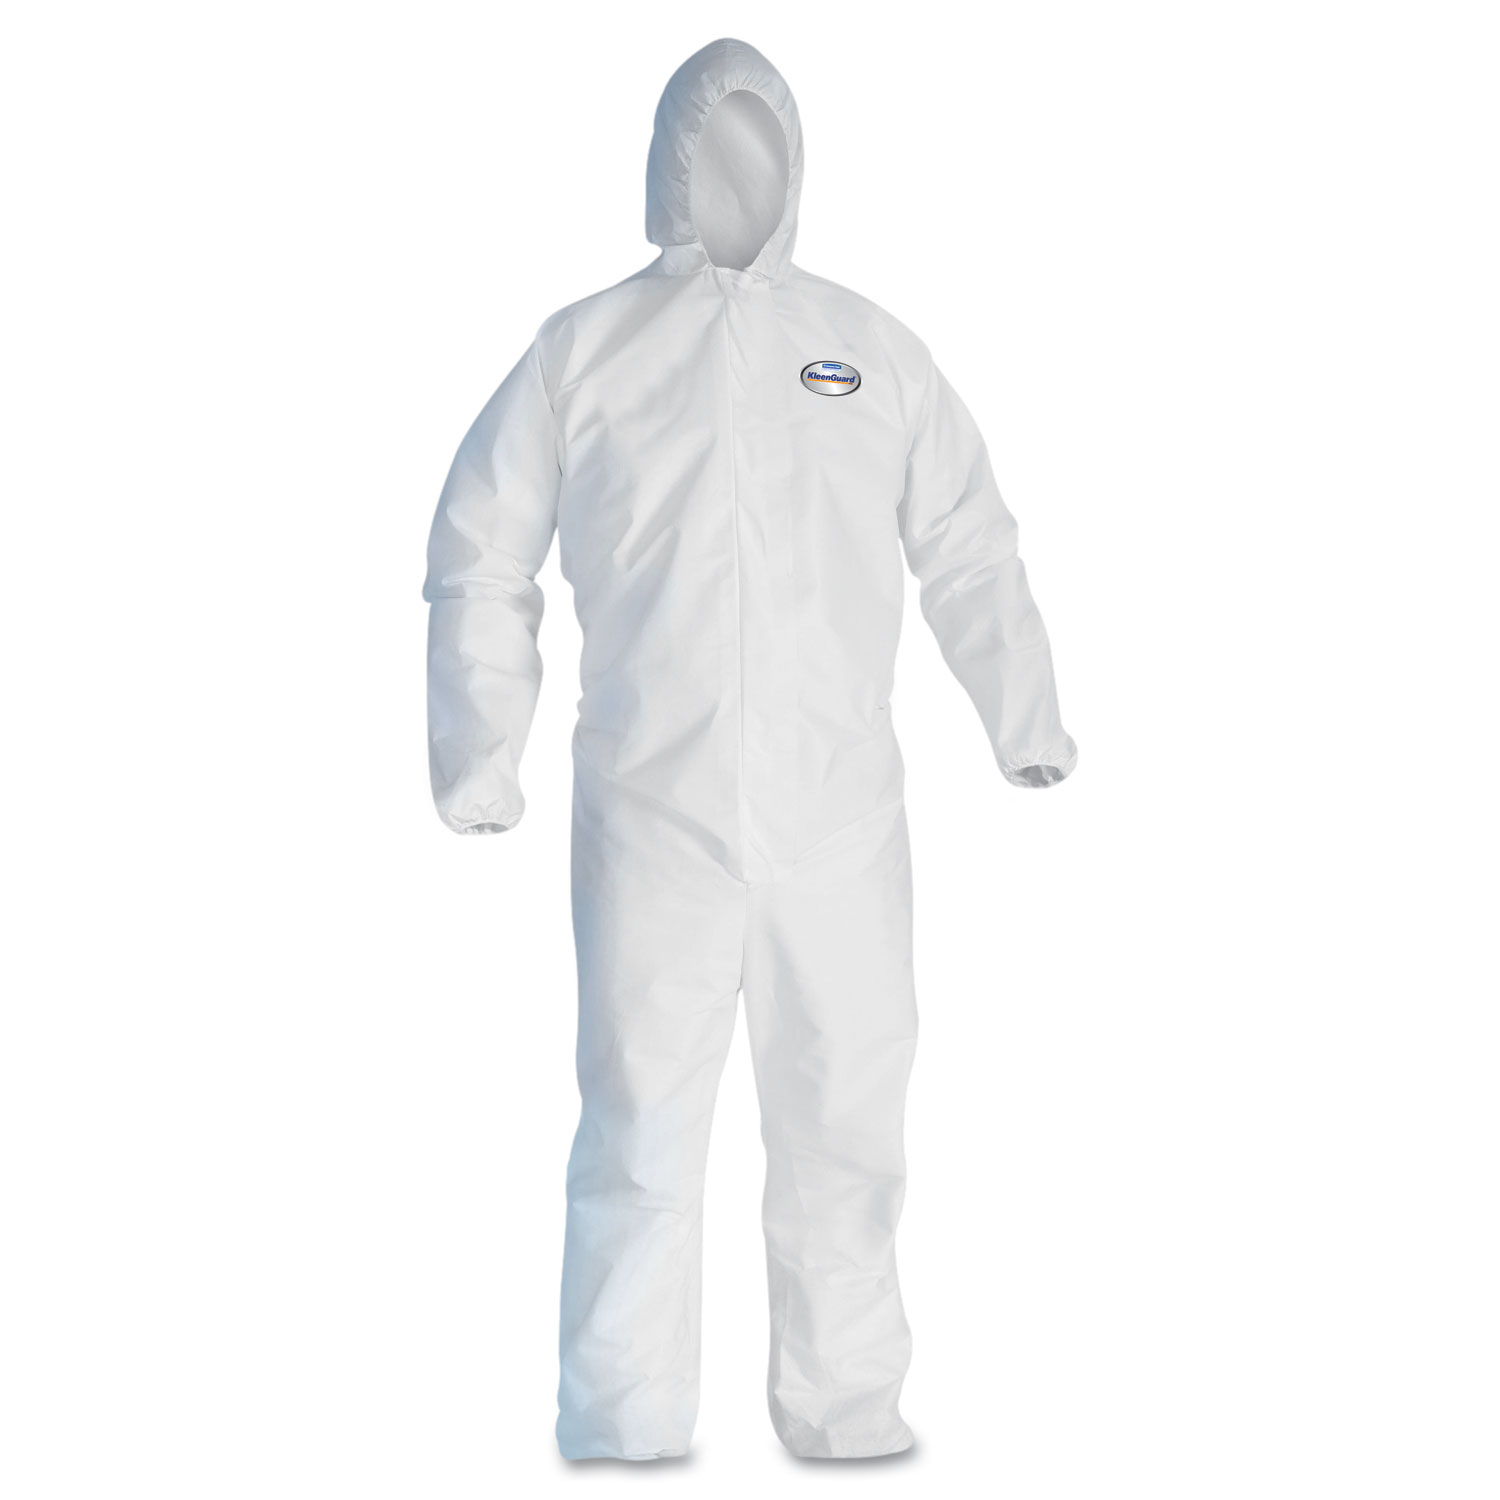 A30 Elastic-Back & Cuff Hooded Coveralls, White, X-Large, 25/Case